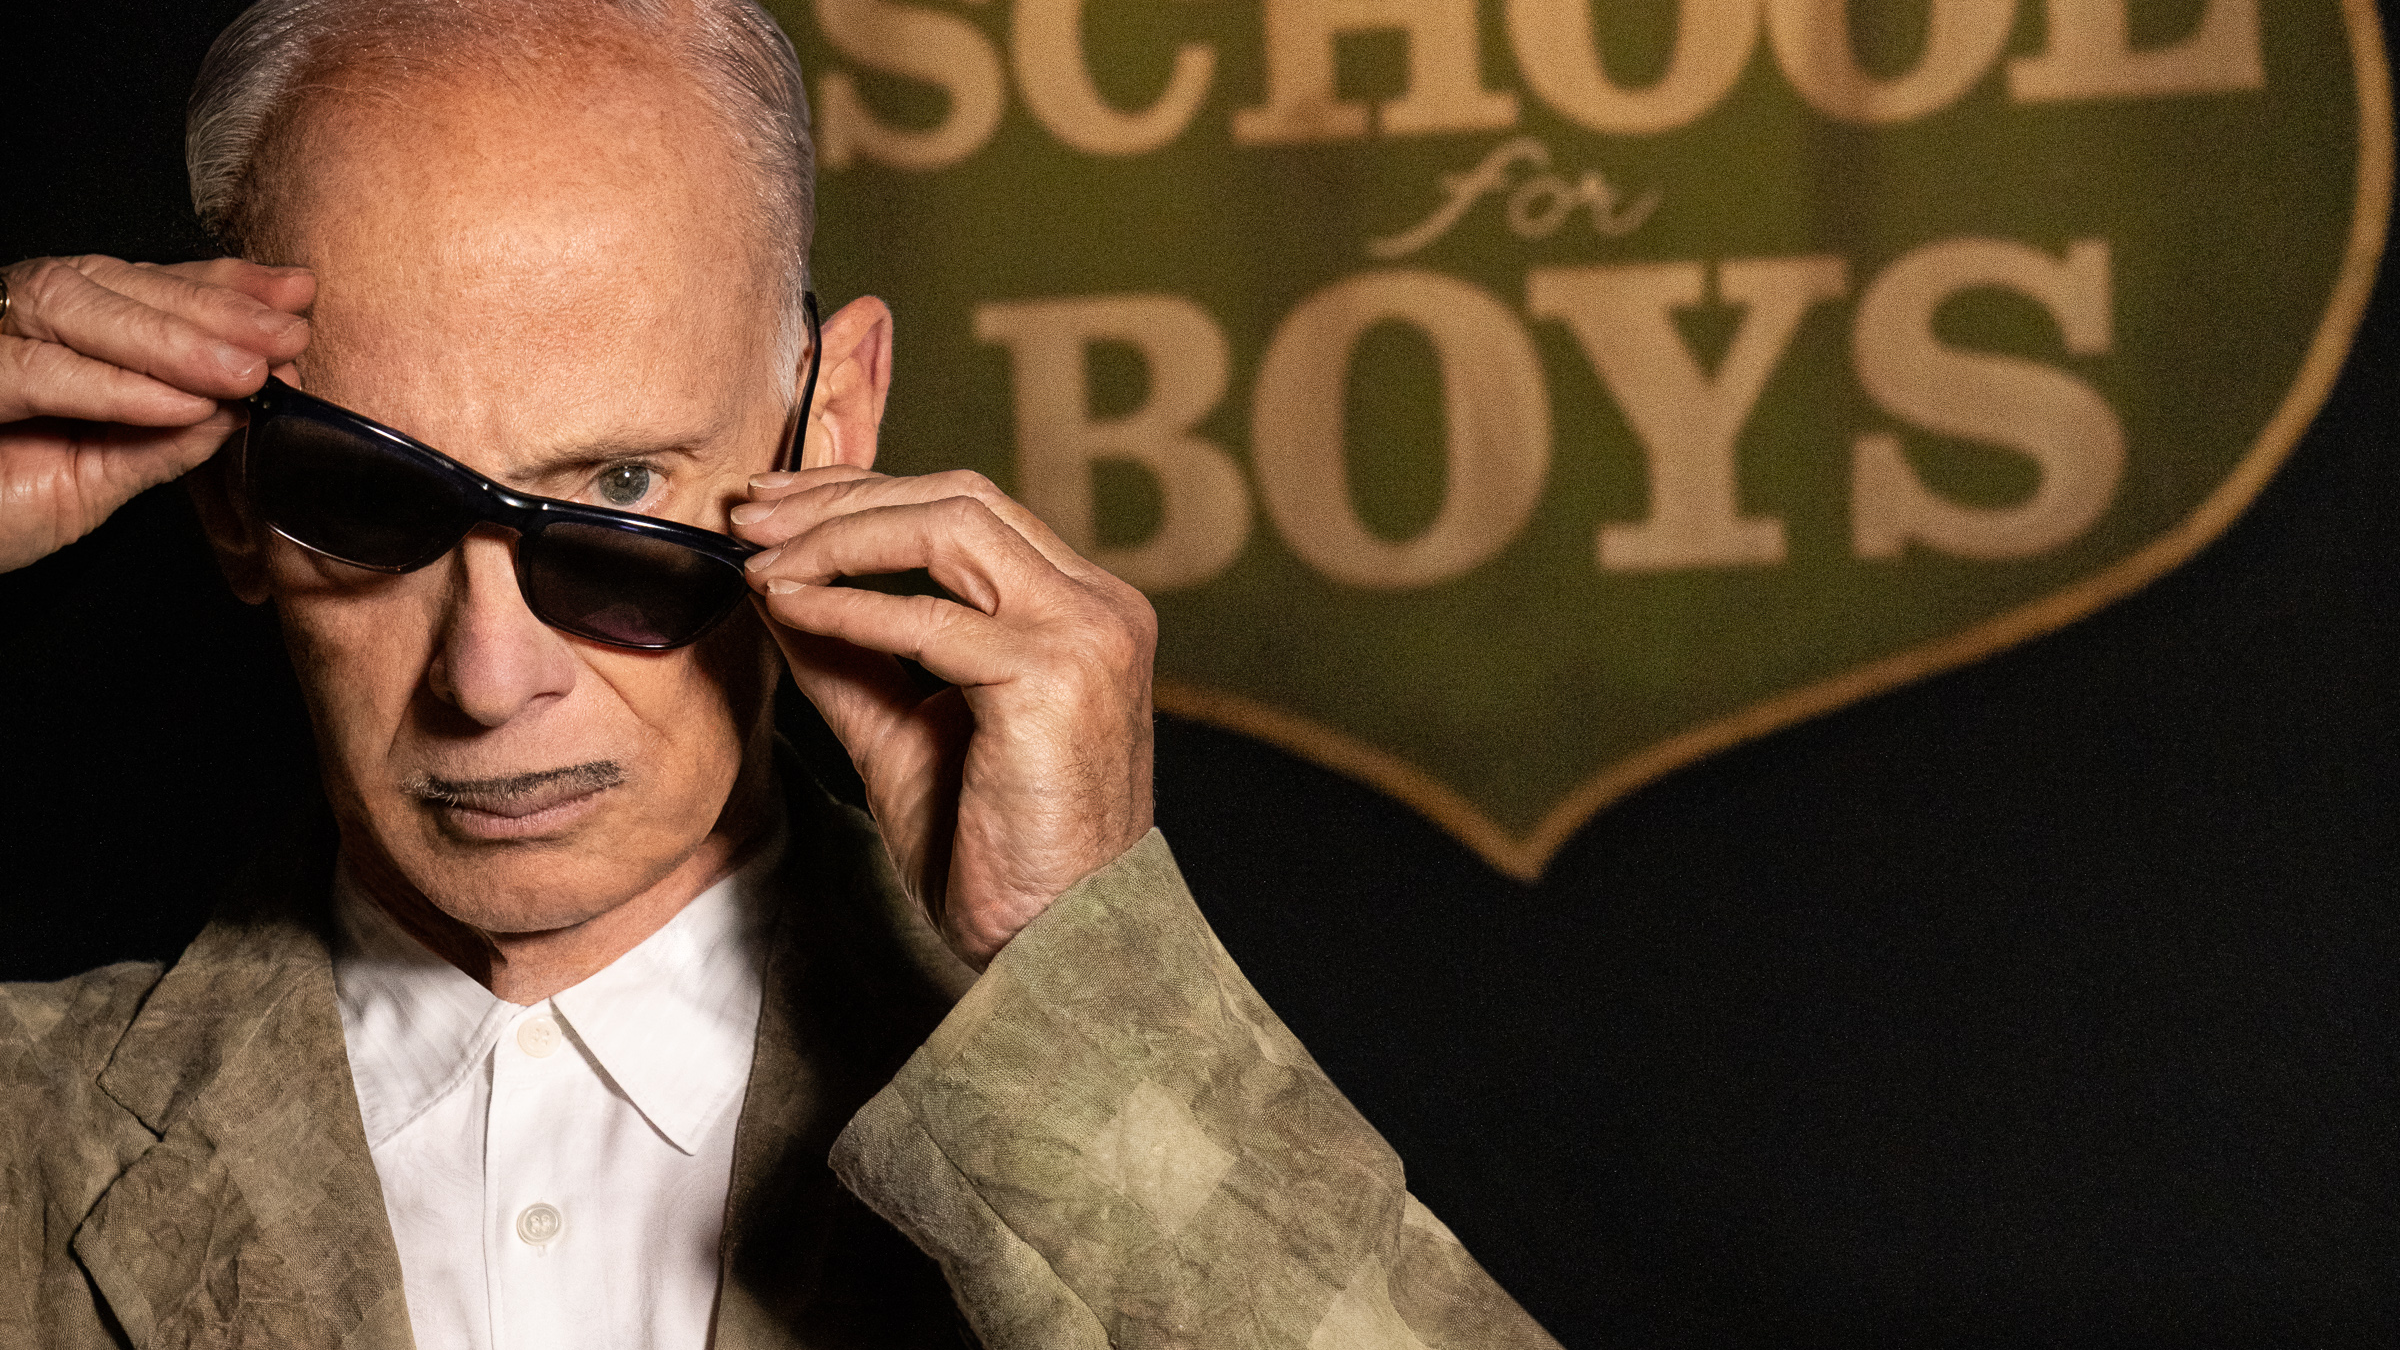 Bad Taste Won in a Joyous Way': An Unfiltered Conversation With John Waters  (Exclusive)